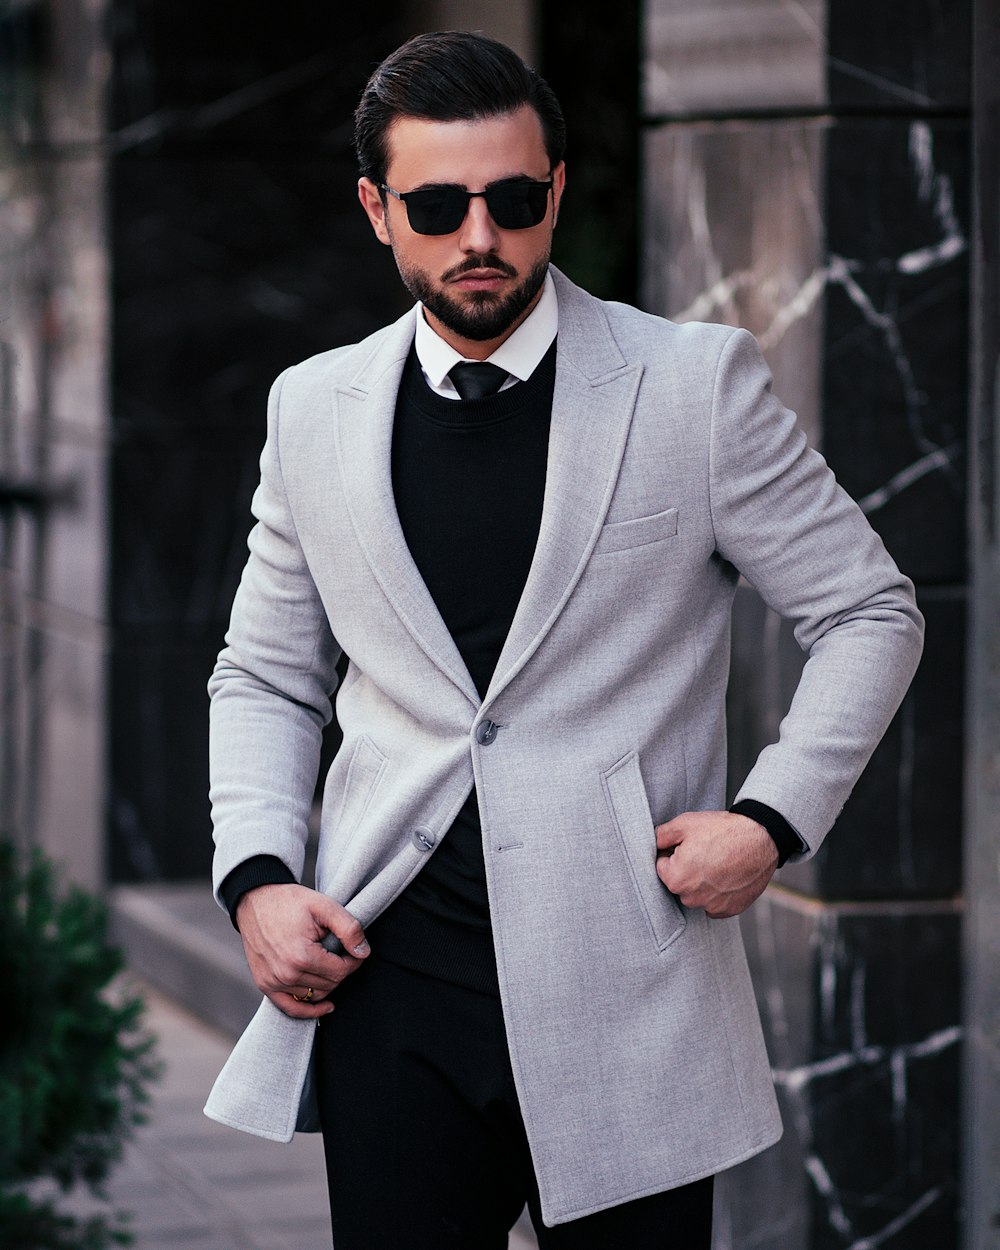 a man in a suit and sunglasses standing on a sidewalk